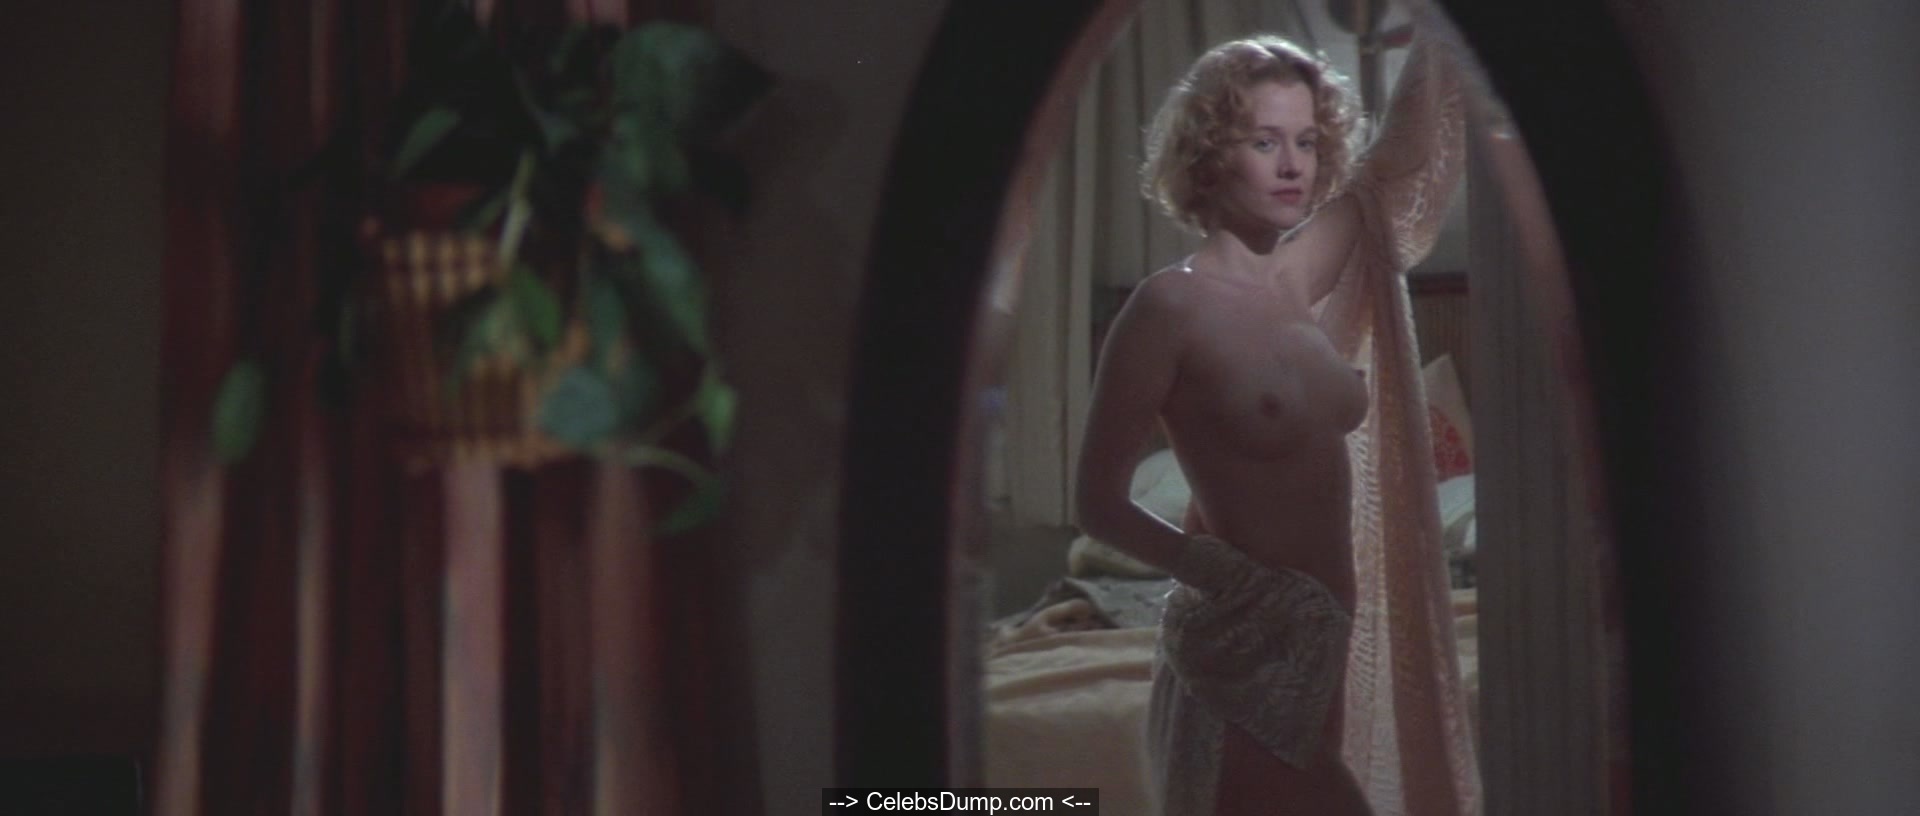 Penelope Ann Miller nude tits in Carlito's Way (1993) .